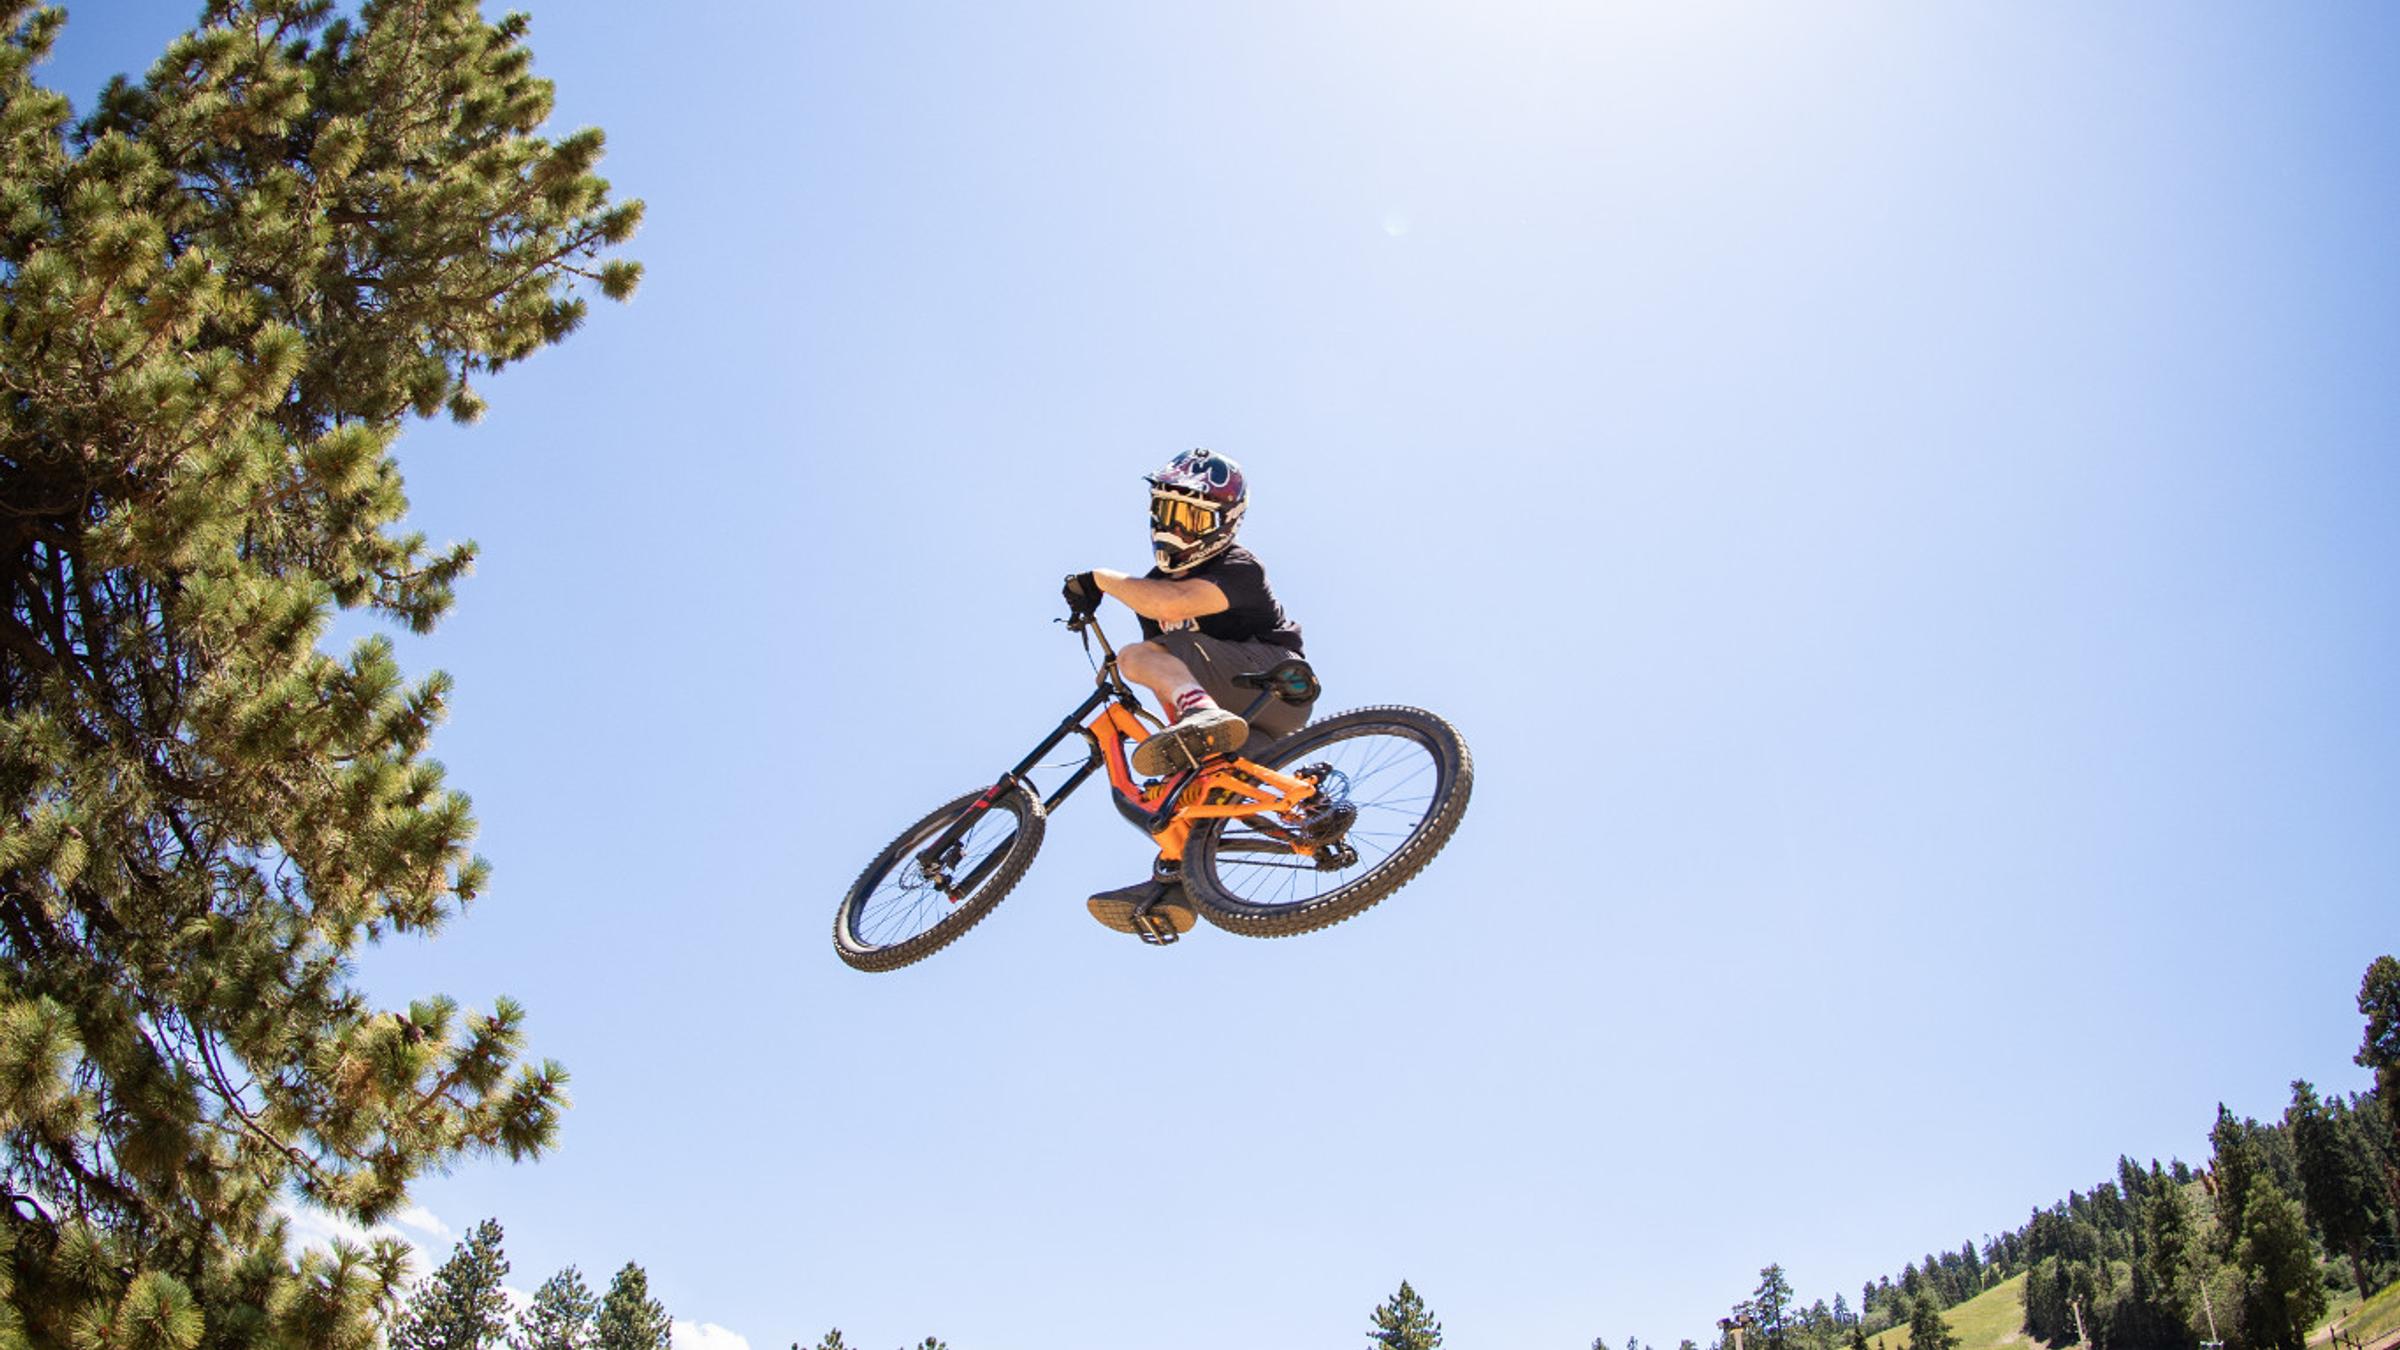 Mountain biker doing a trick in the air